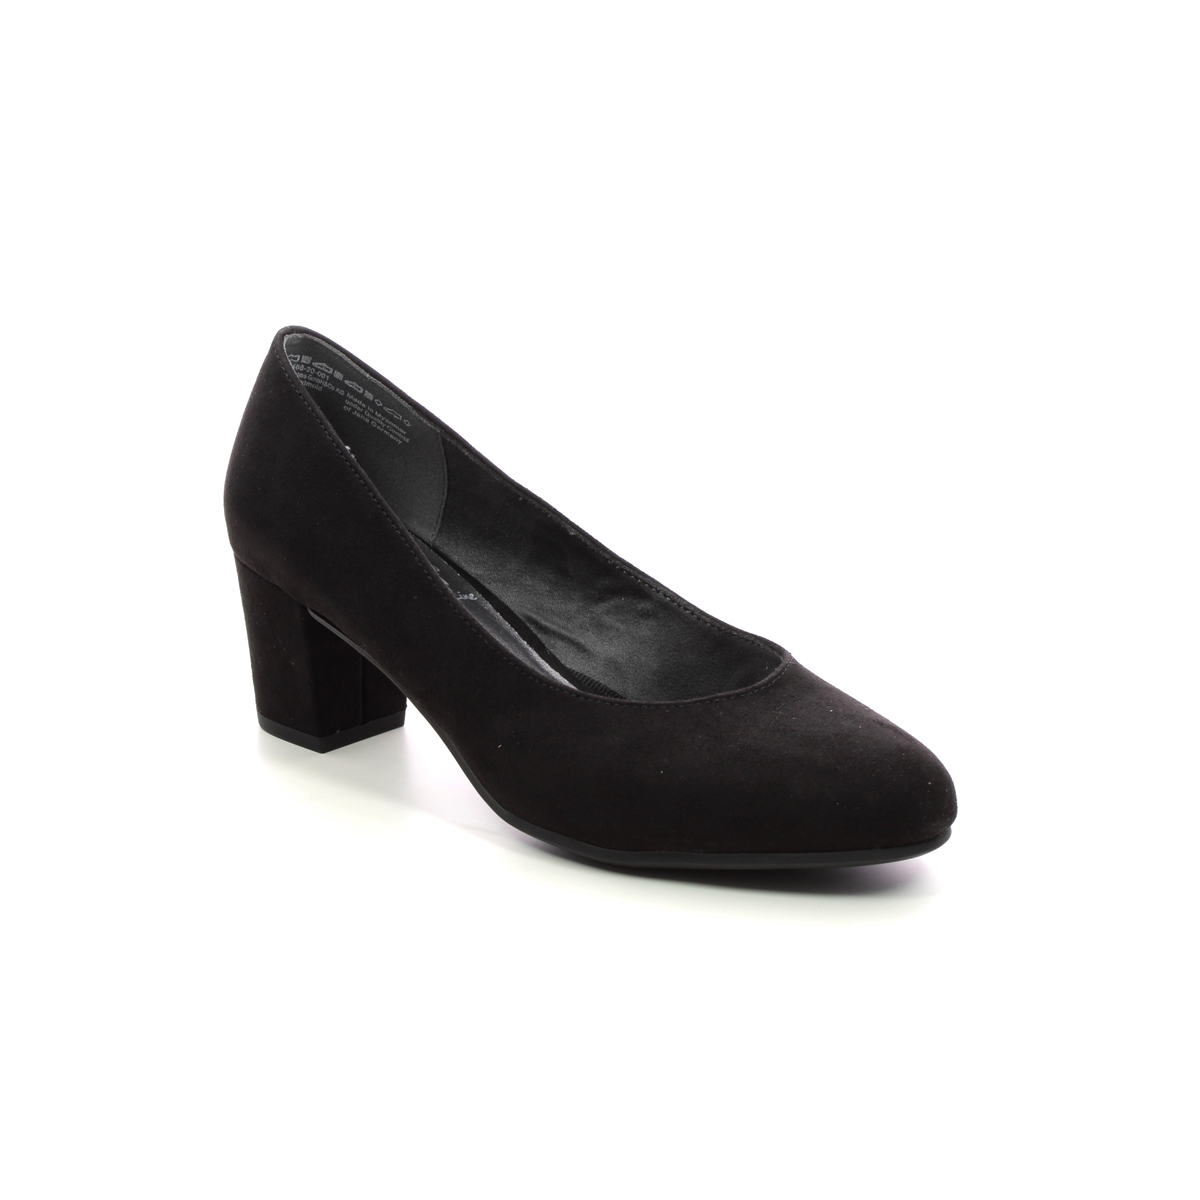 Jana Abuplain Wide Black Womens Court Shoes 22478-42-001 in a Plain Textile in Size 40